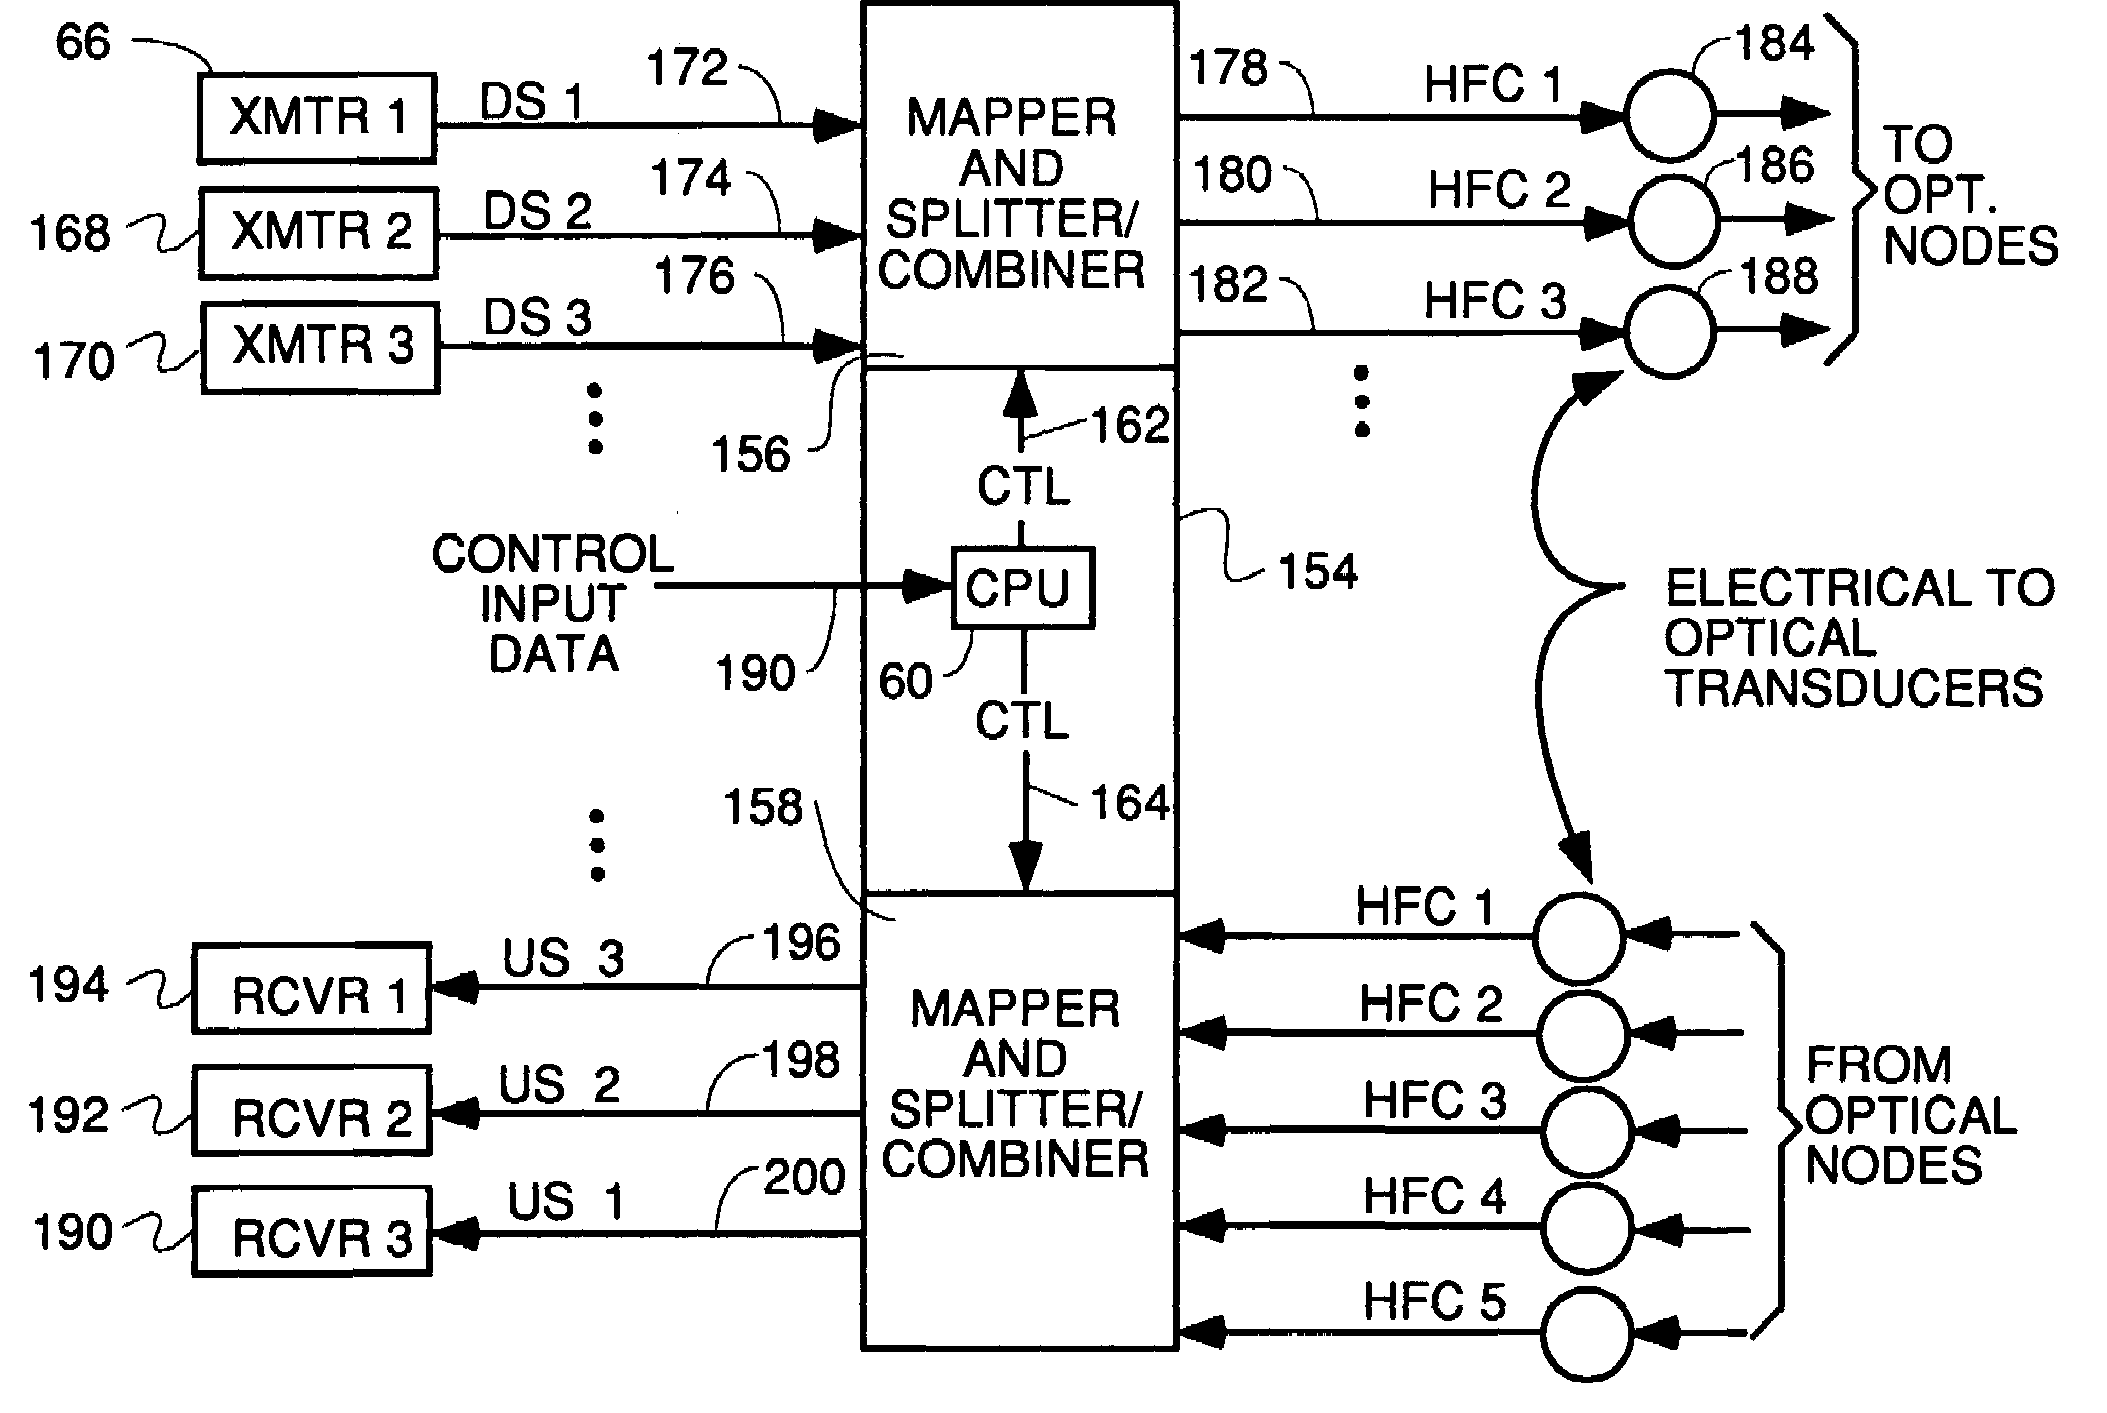 Cable modem termination system with flexible addition of single upstreams or downstreams